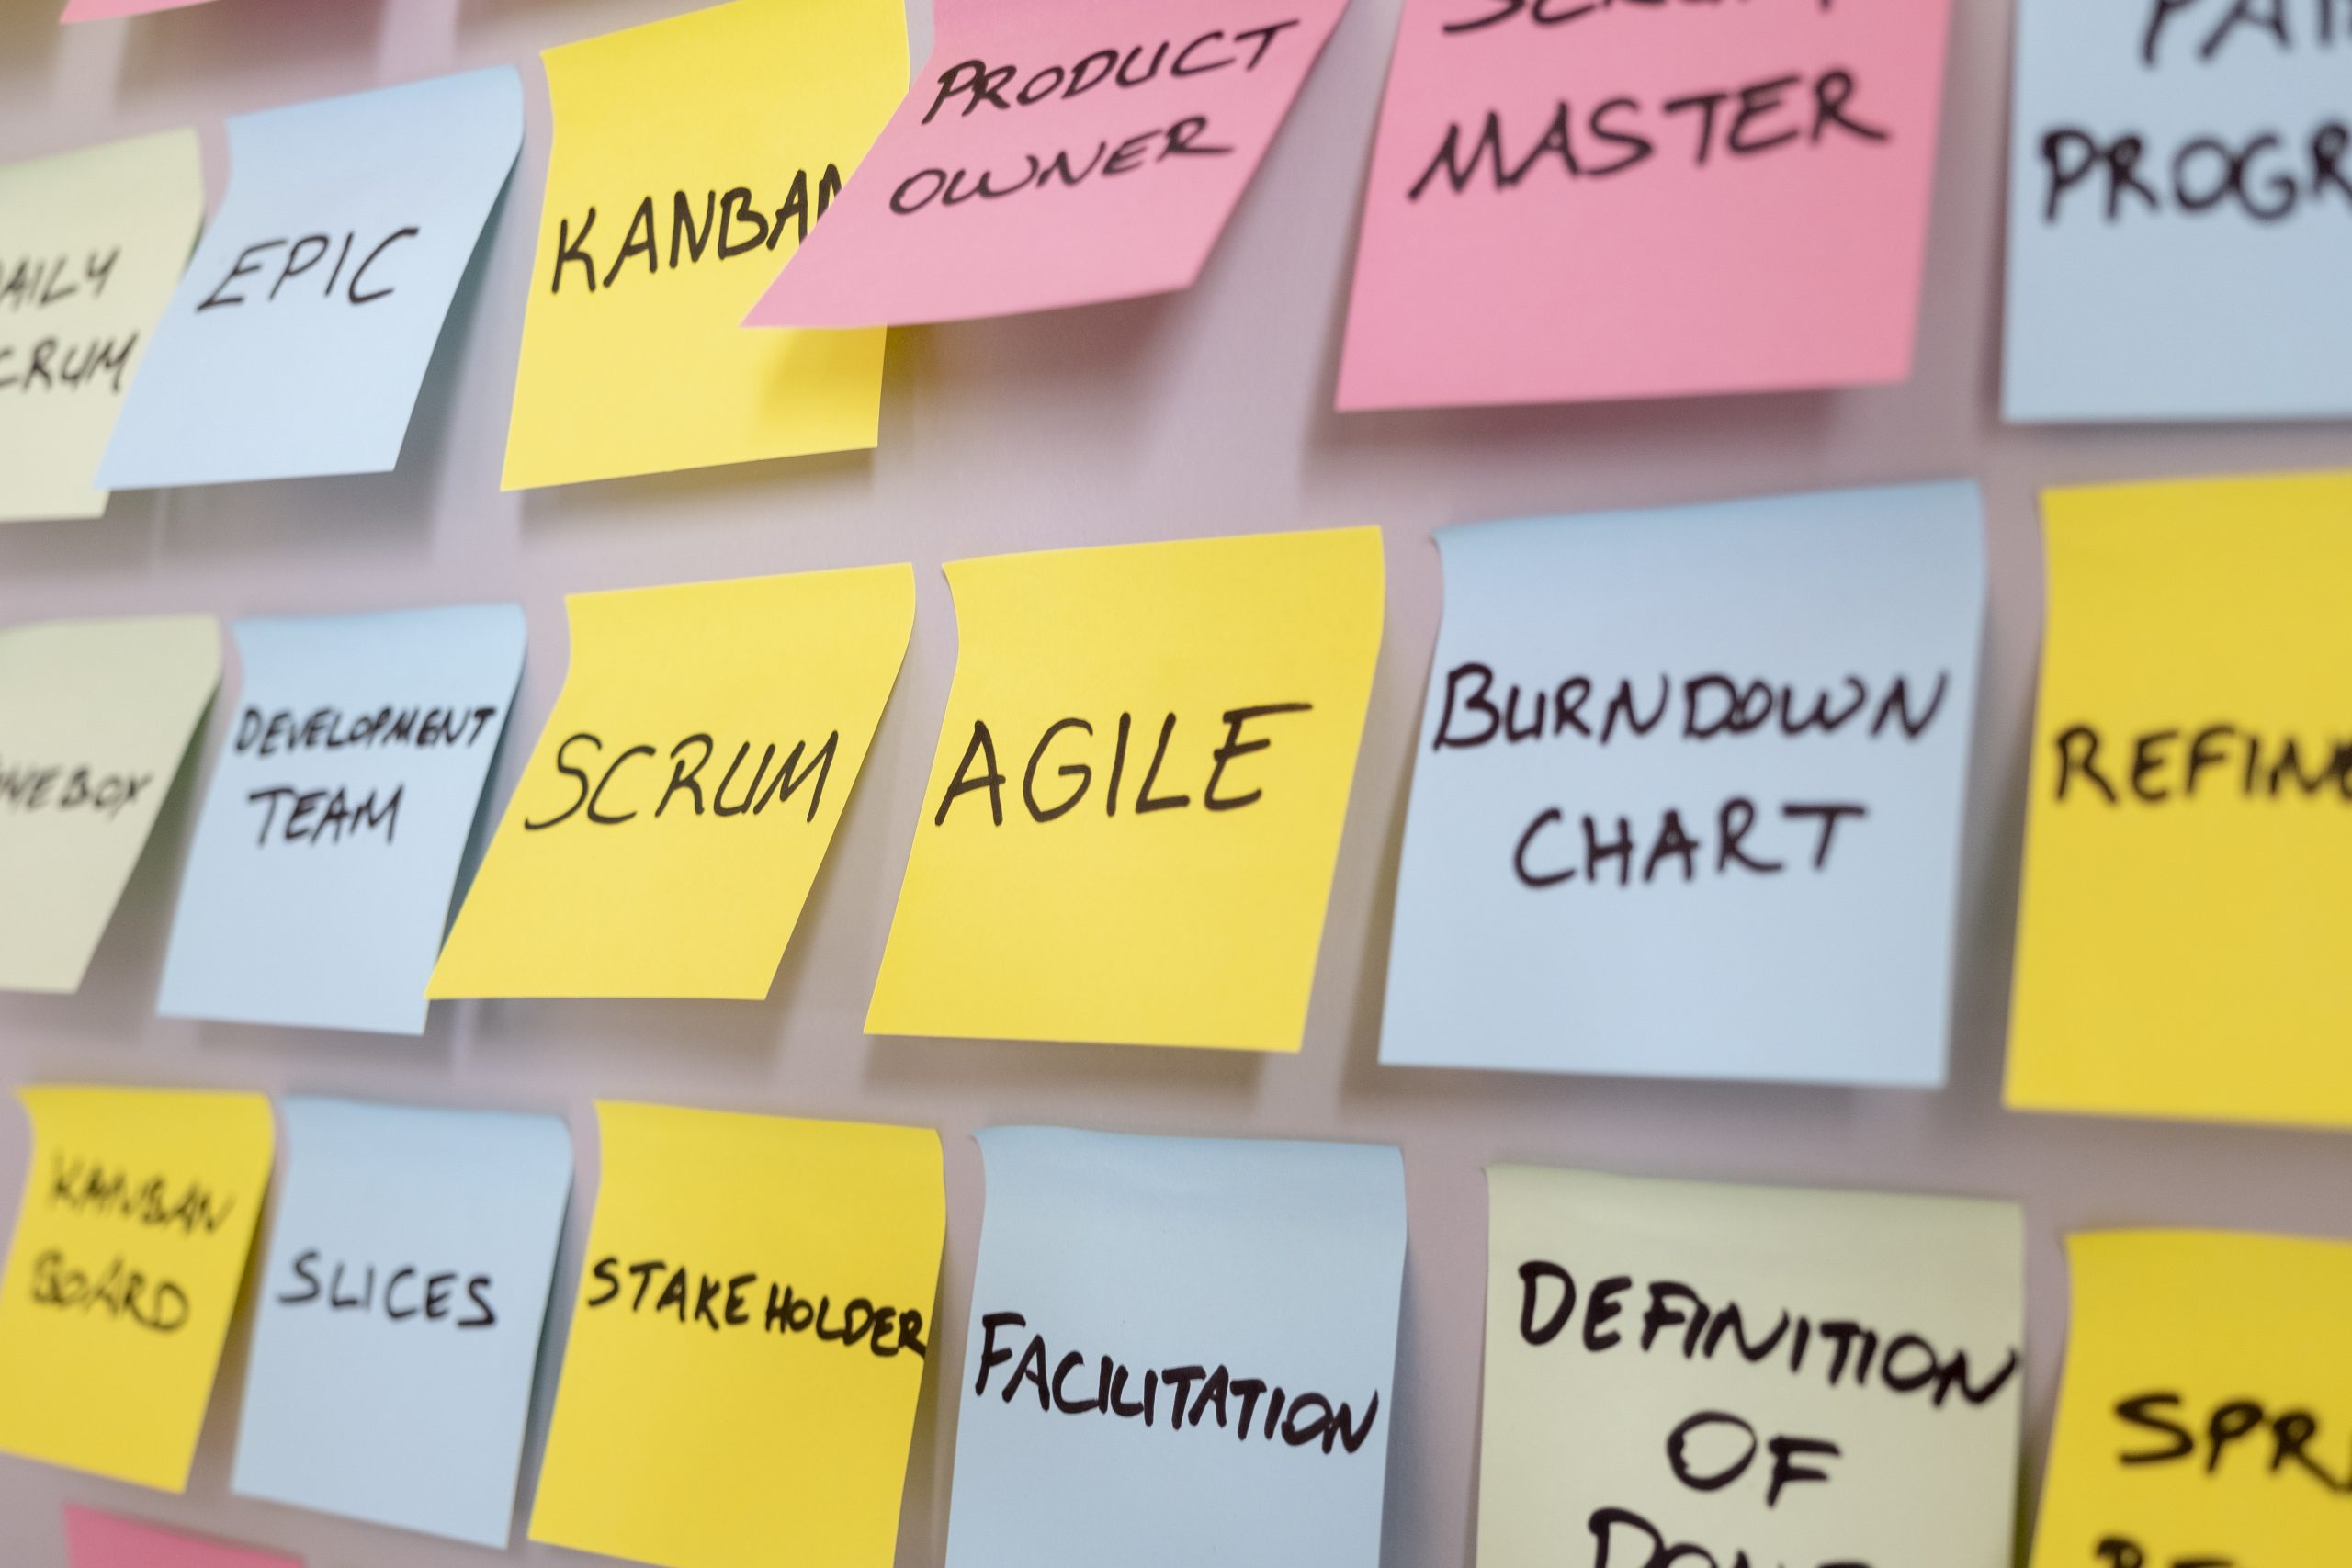 Agile keywords on Post-It notes including Scrum, Agile, Burndown Chart, Product Owner